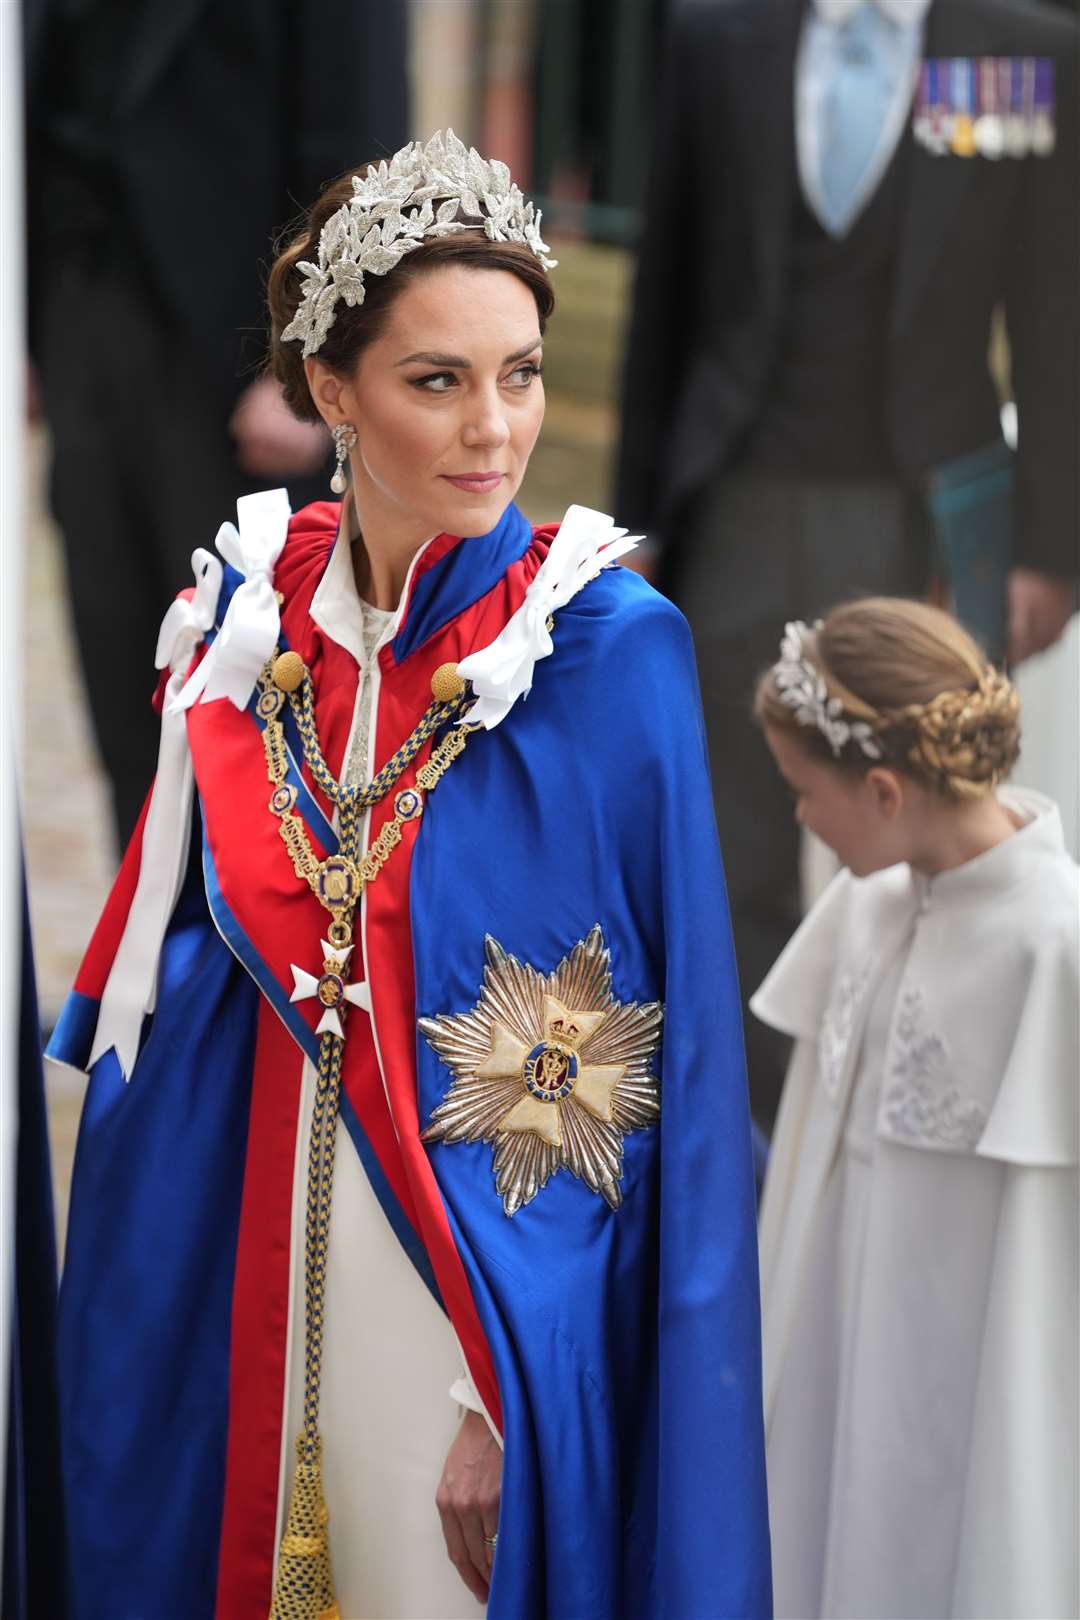 The Princess of Wales arriving at the coronation ceremony (Dan Charity/The Sun/PA)